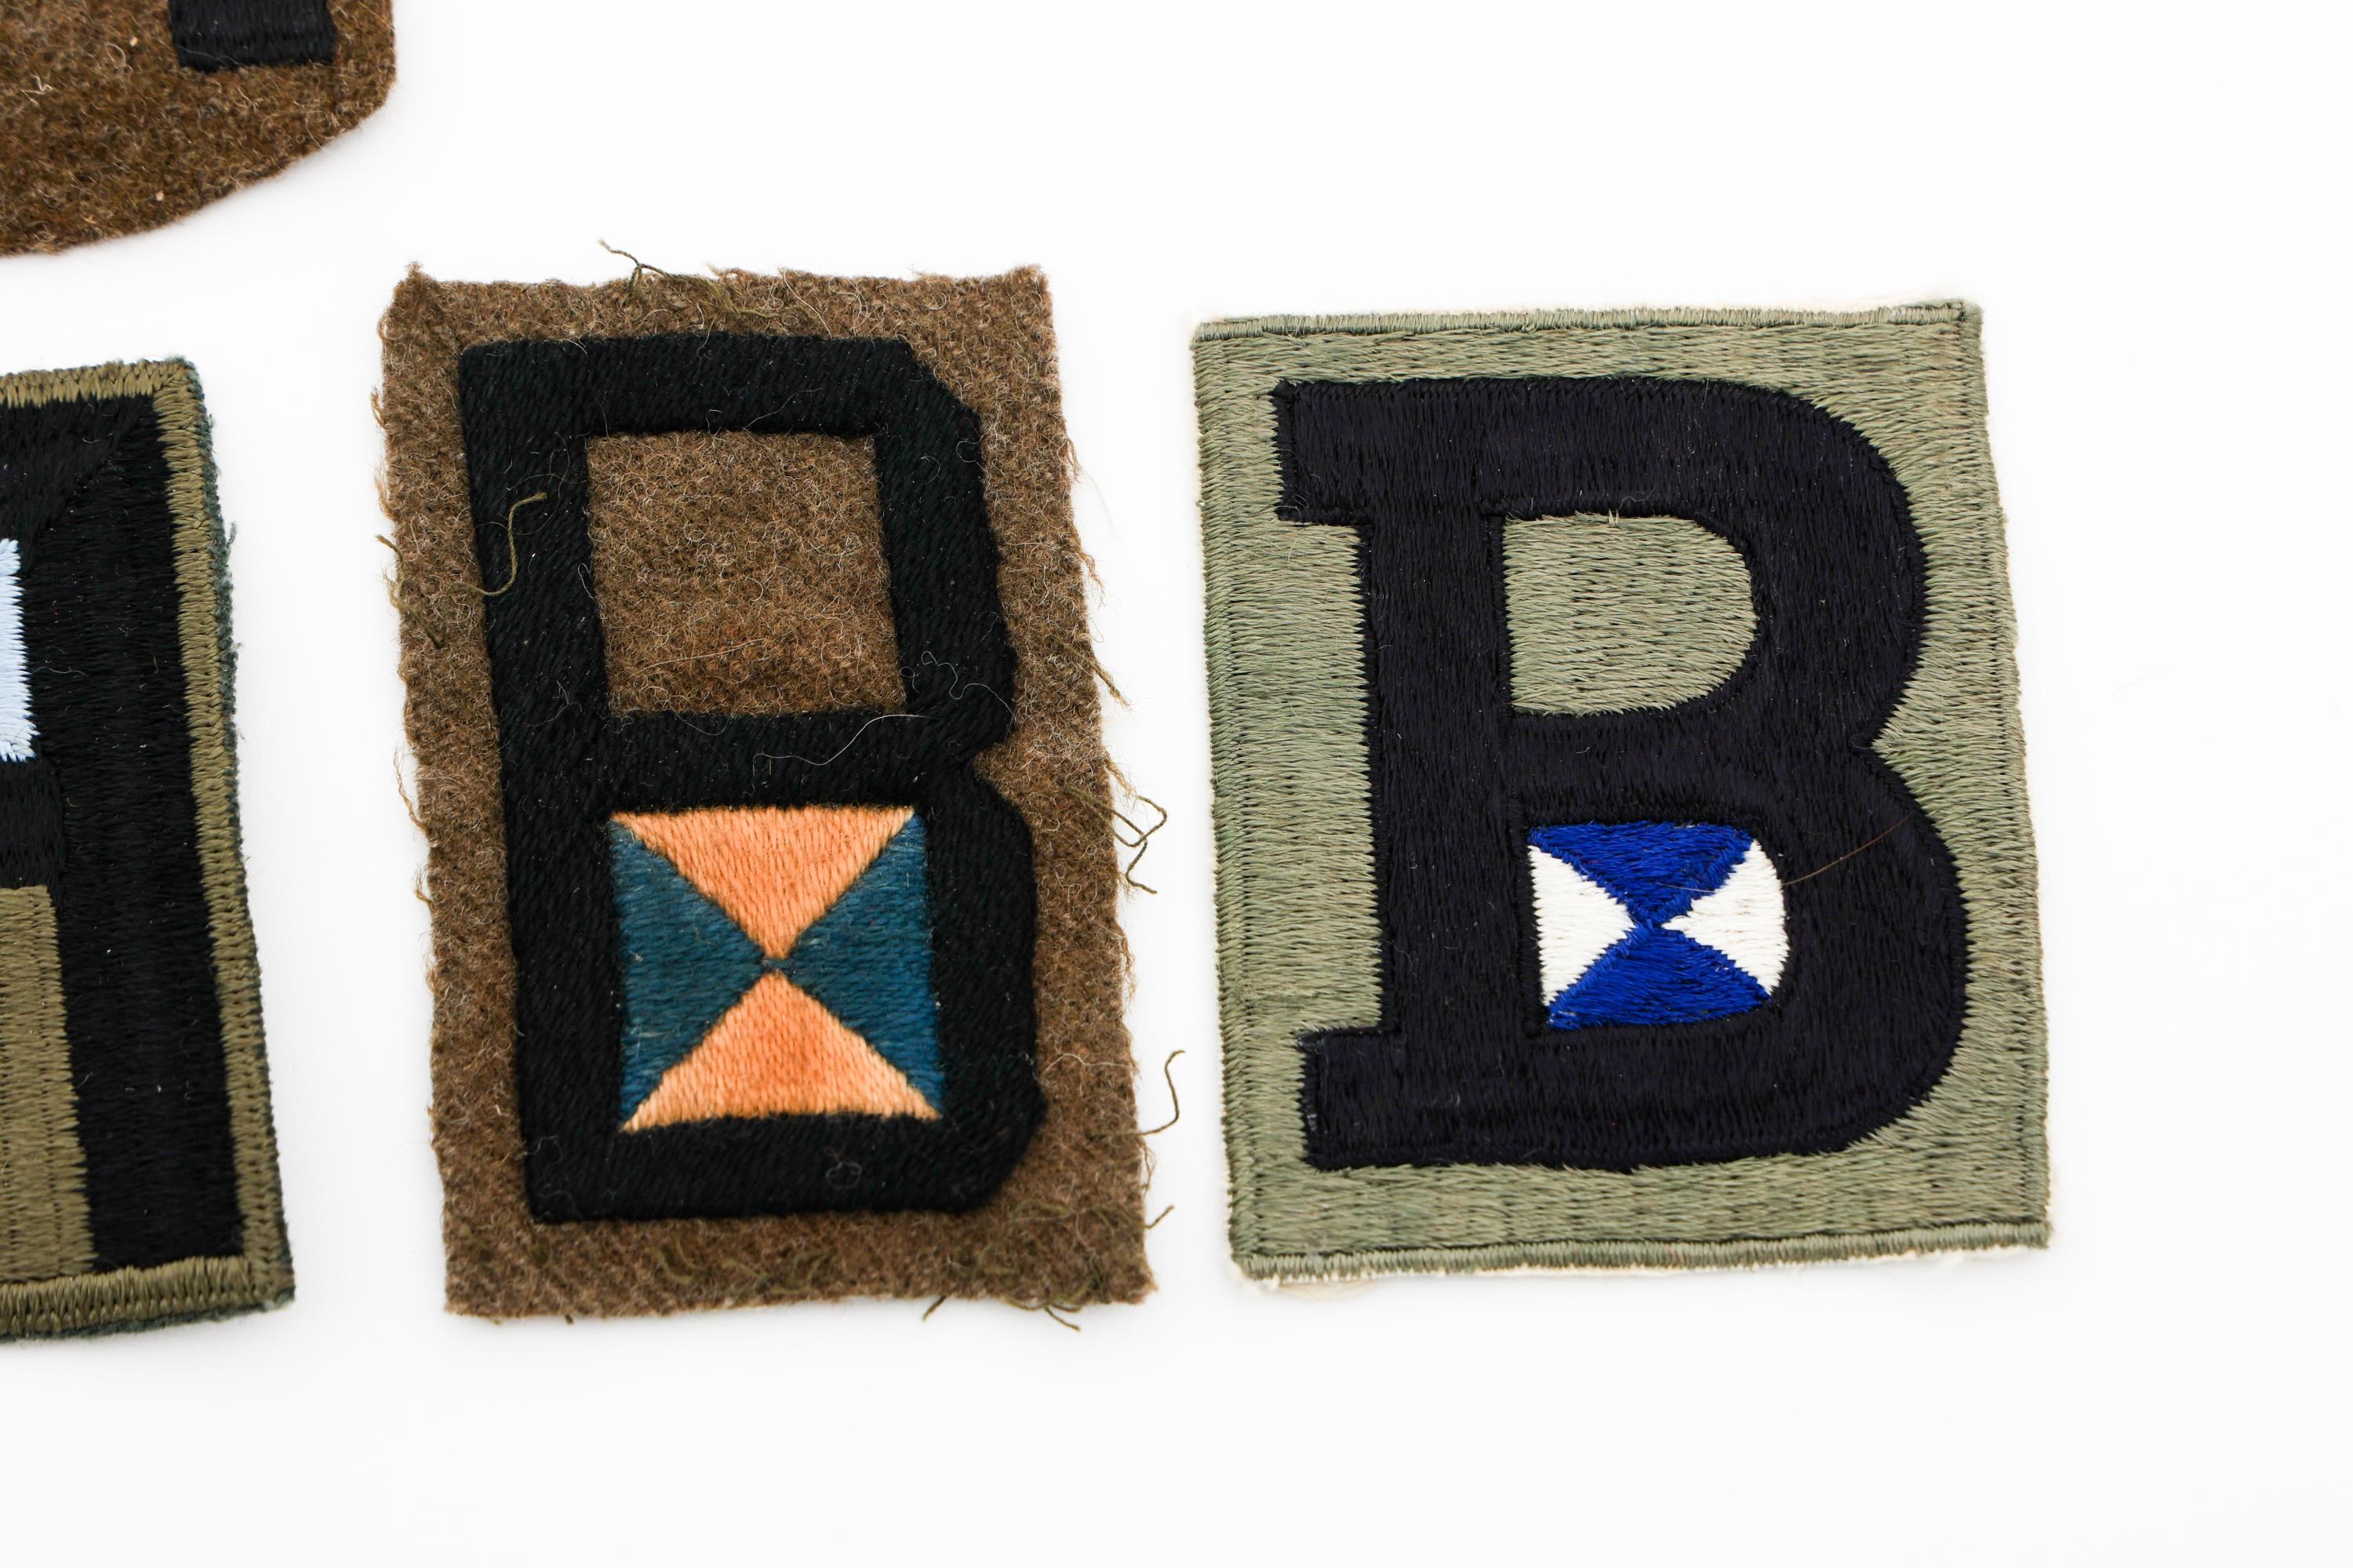 WWII US 1ST ARMY VARIATION SHOULDER PATCHES